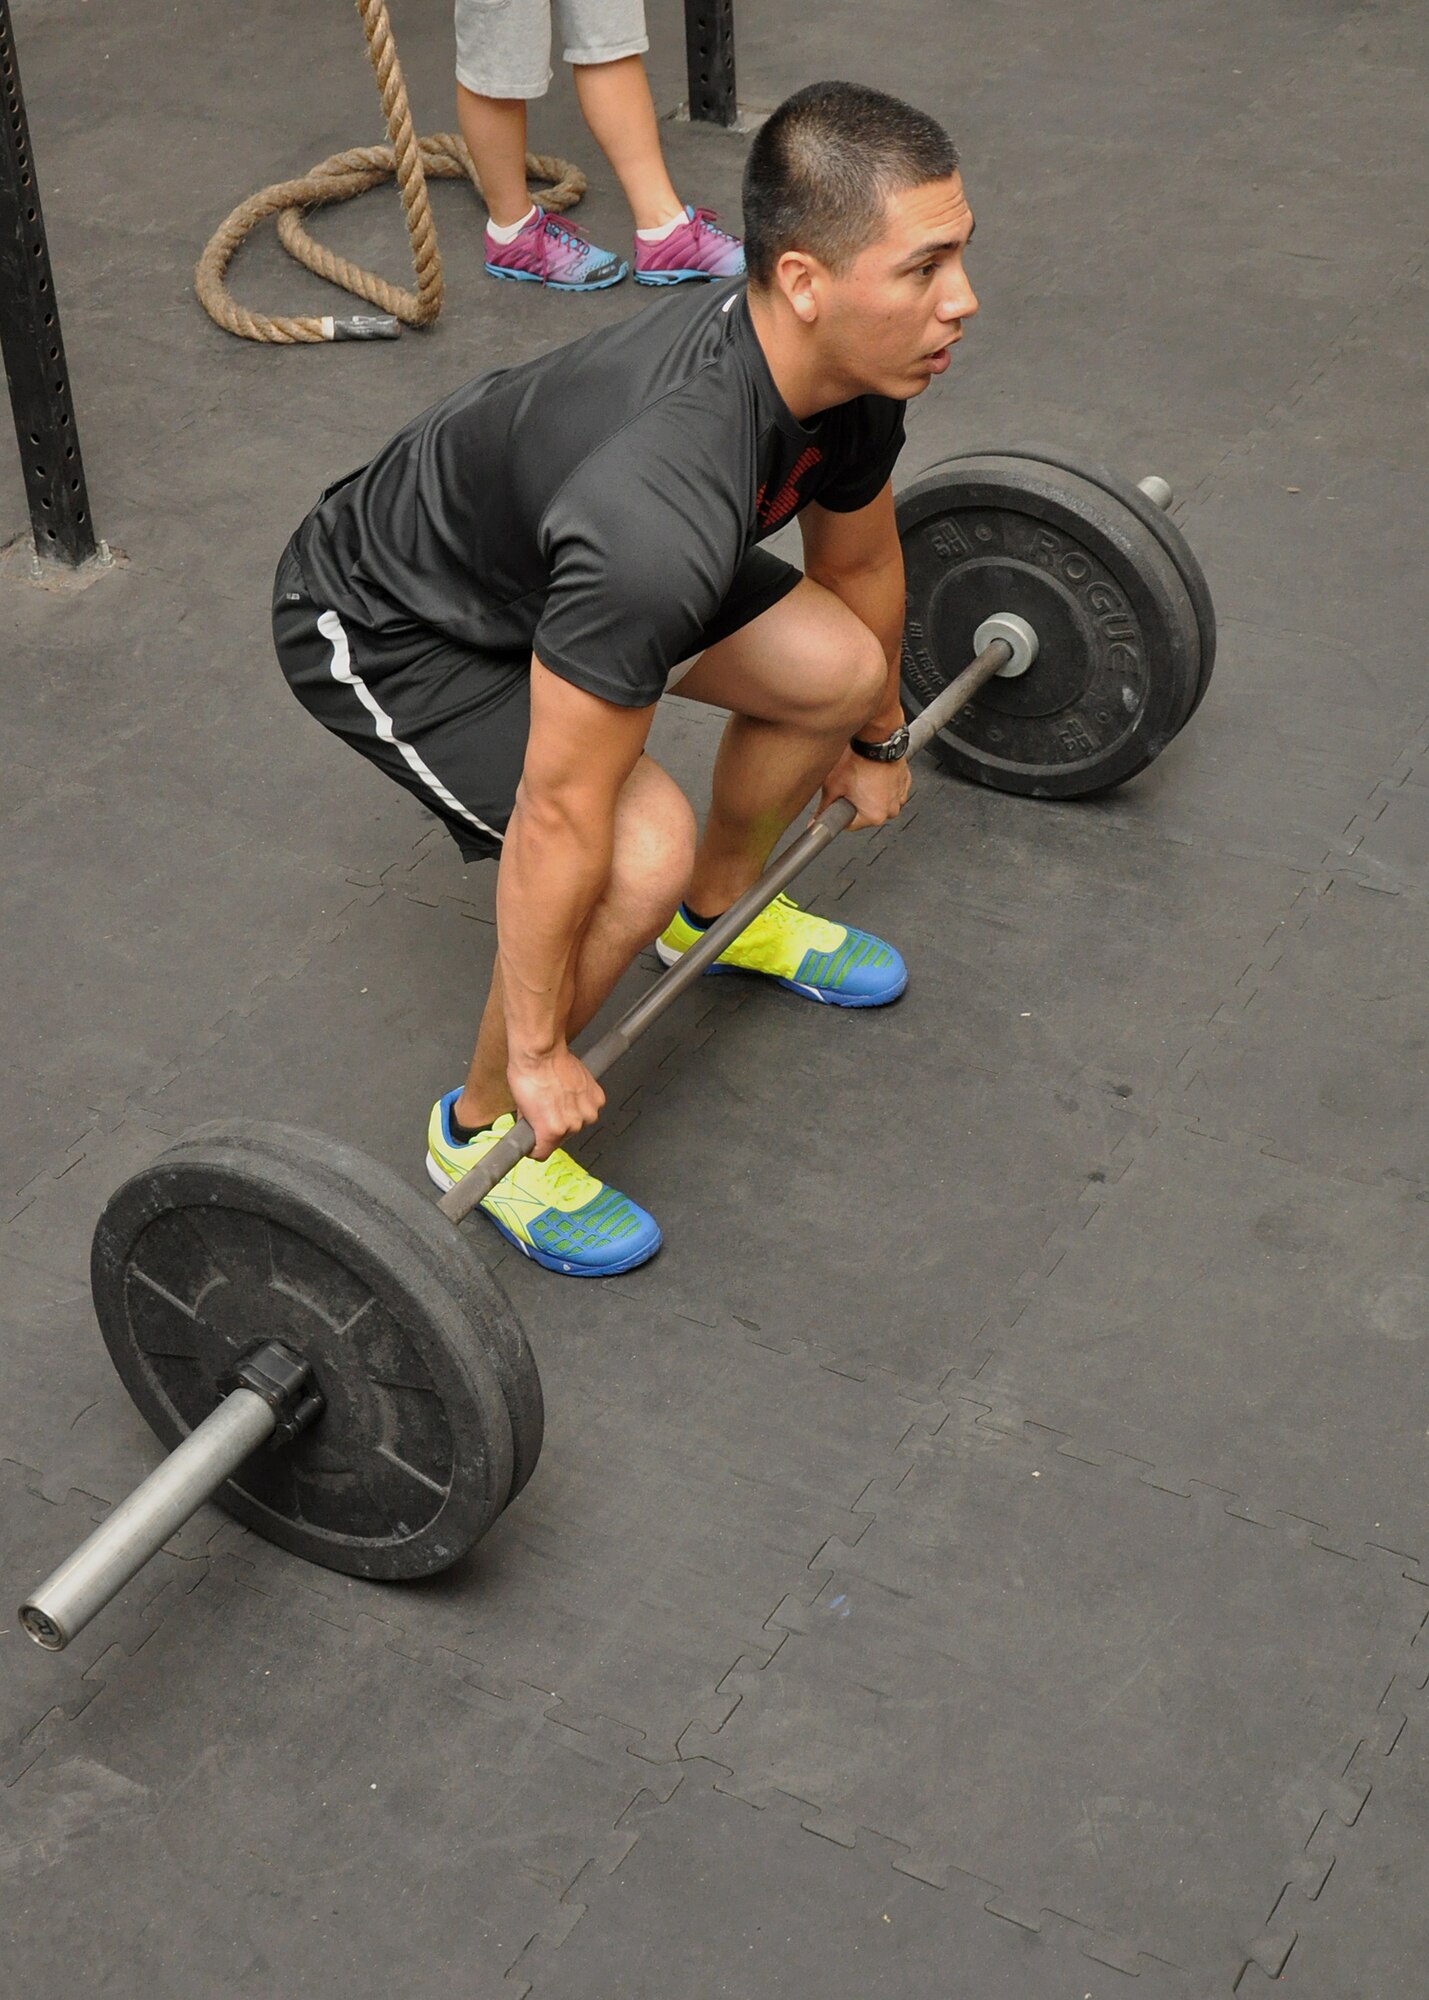 Air Force Senior Airman Emmanuel Arroyo, 380th Expeditionary Logistics Readiness Squadron supply specialist, sets himself up to perform a "clean" during a CrossFit class at the tactical fitness facility at an undisclosed location in Southwest Asia, Jan. 3, 2014. (U.S. Air Force photo by Maj. Khalid Cannon/Released)